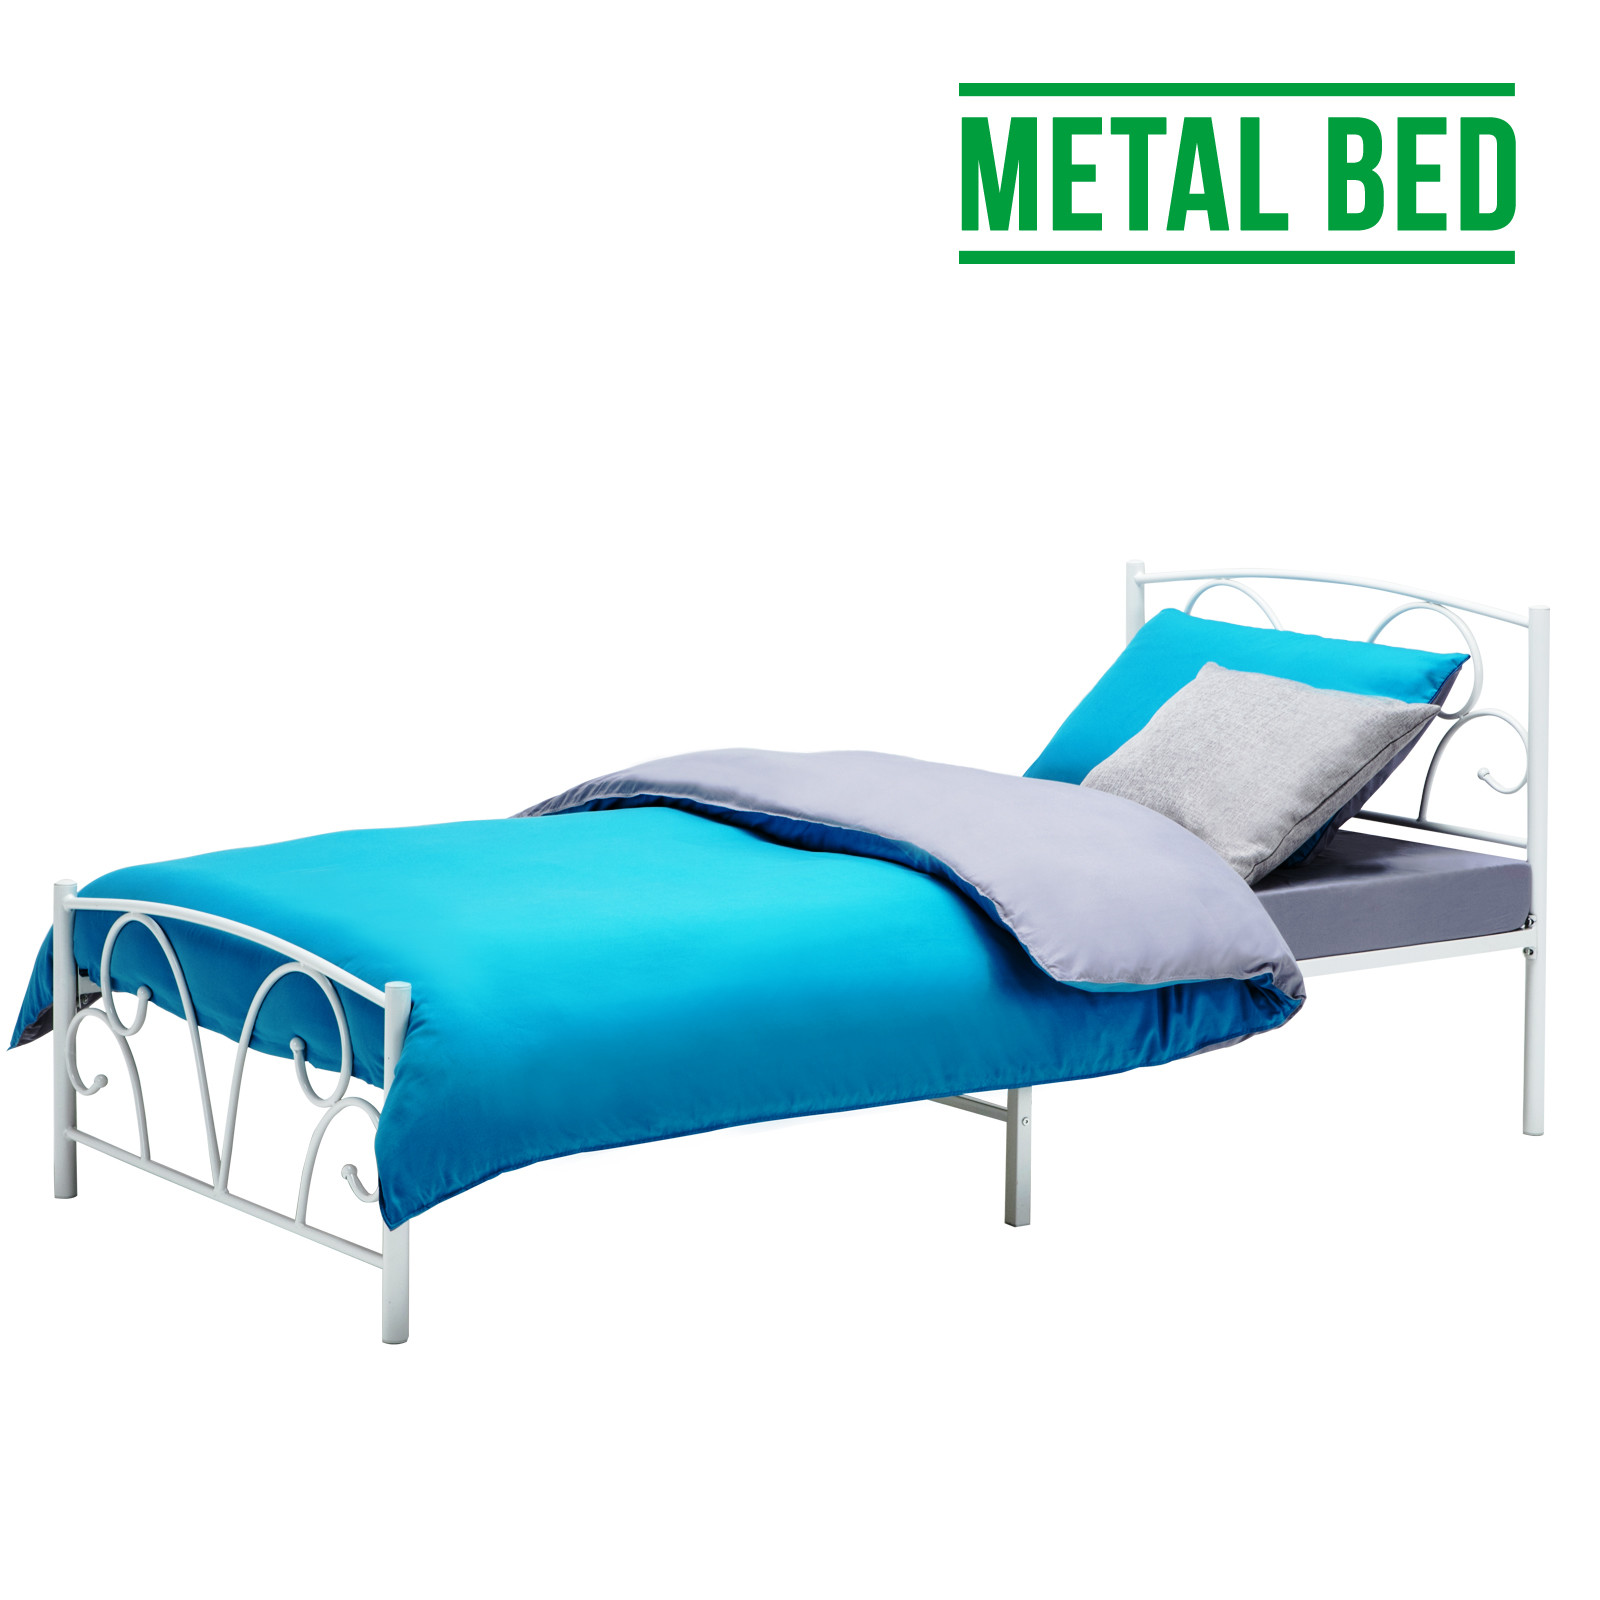 OEM Furniture Metal Pipe Bed Strong Frame Noise Free For Home Hotel School